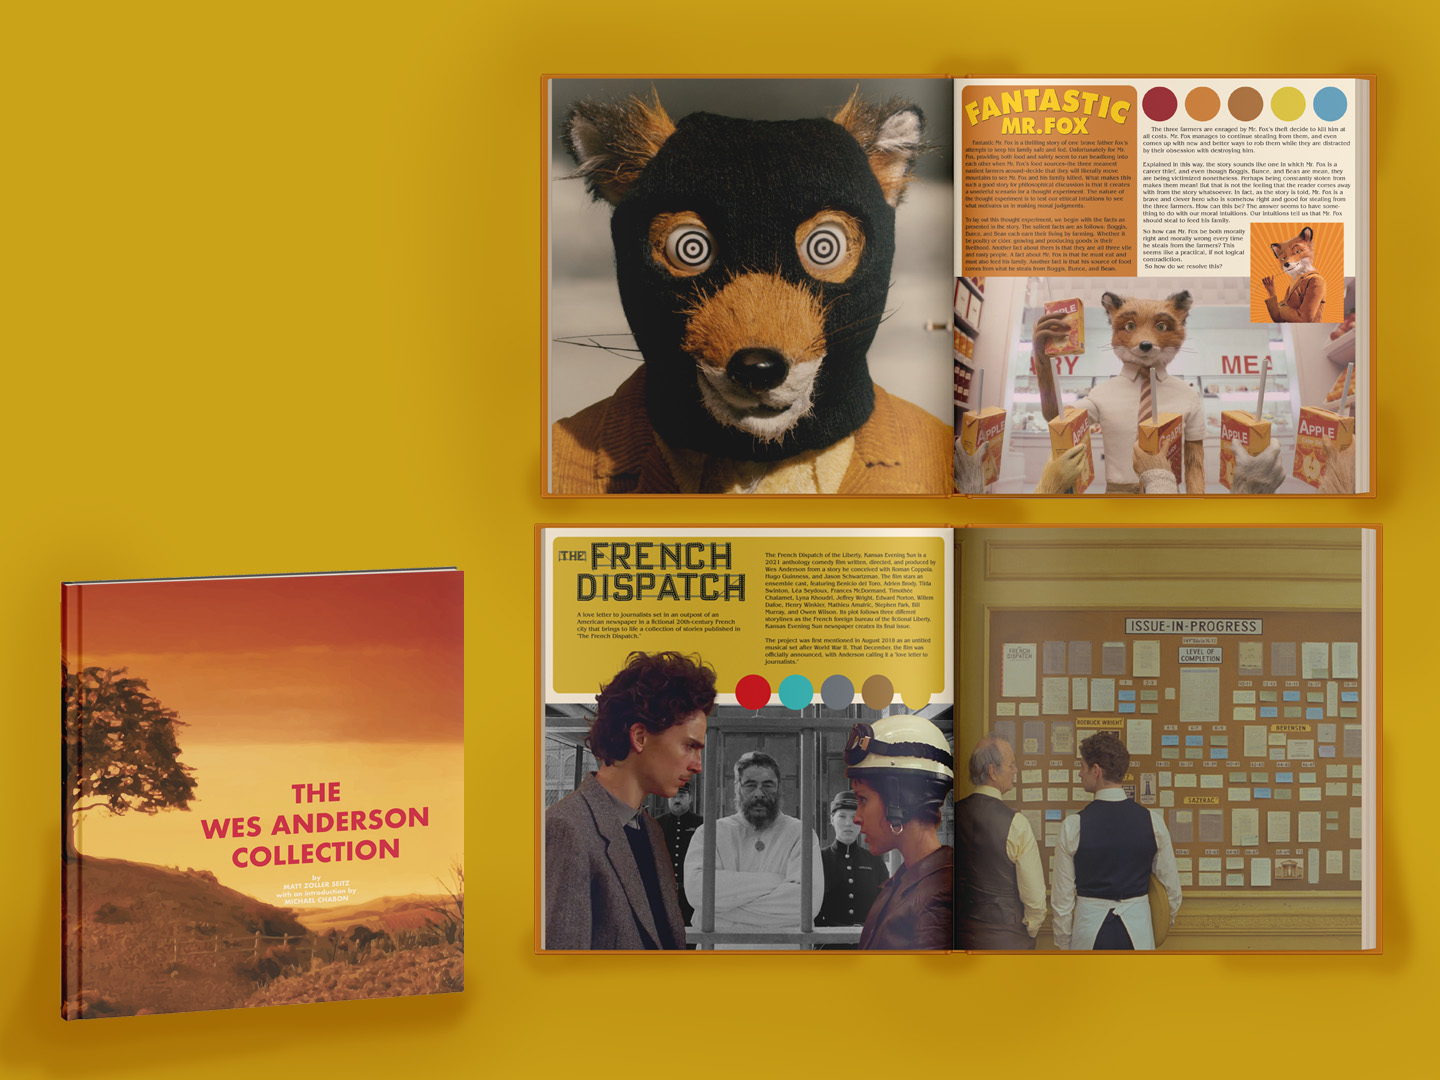  / “The Wes Anderson Collection” Coffee table book 10 x 10 inches, 2021. This book has editorial design spreads for each of Wes Anderson’s most famous movies. Image 2/2 